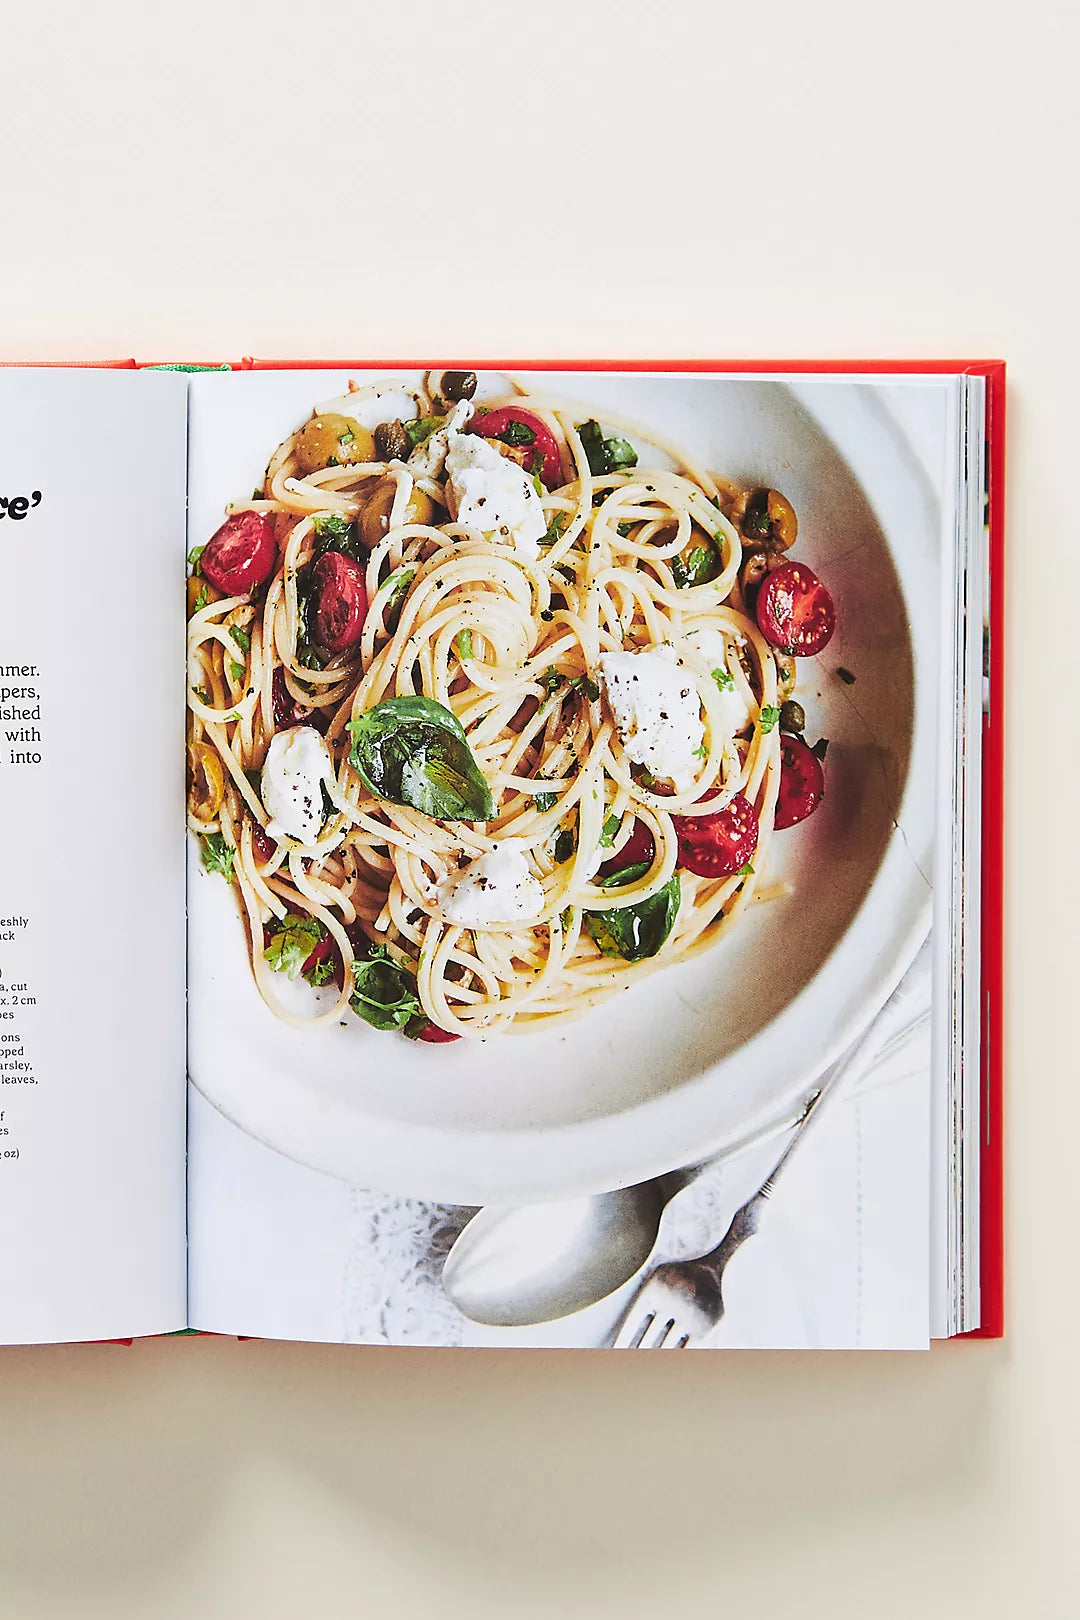 "RECIPES FROM ROME"